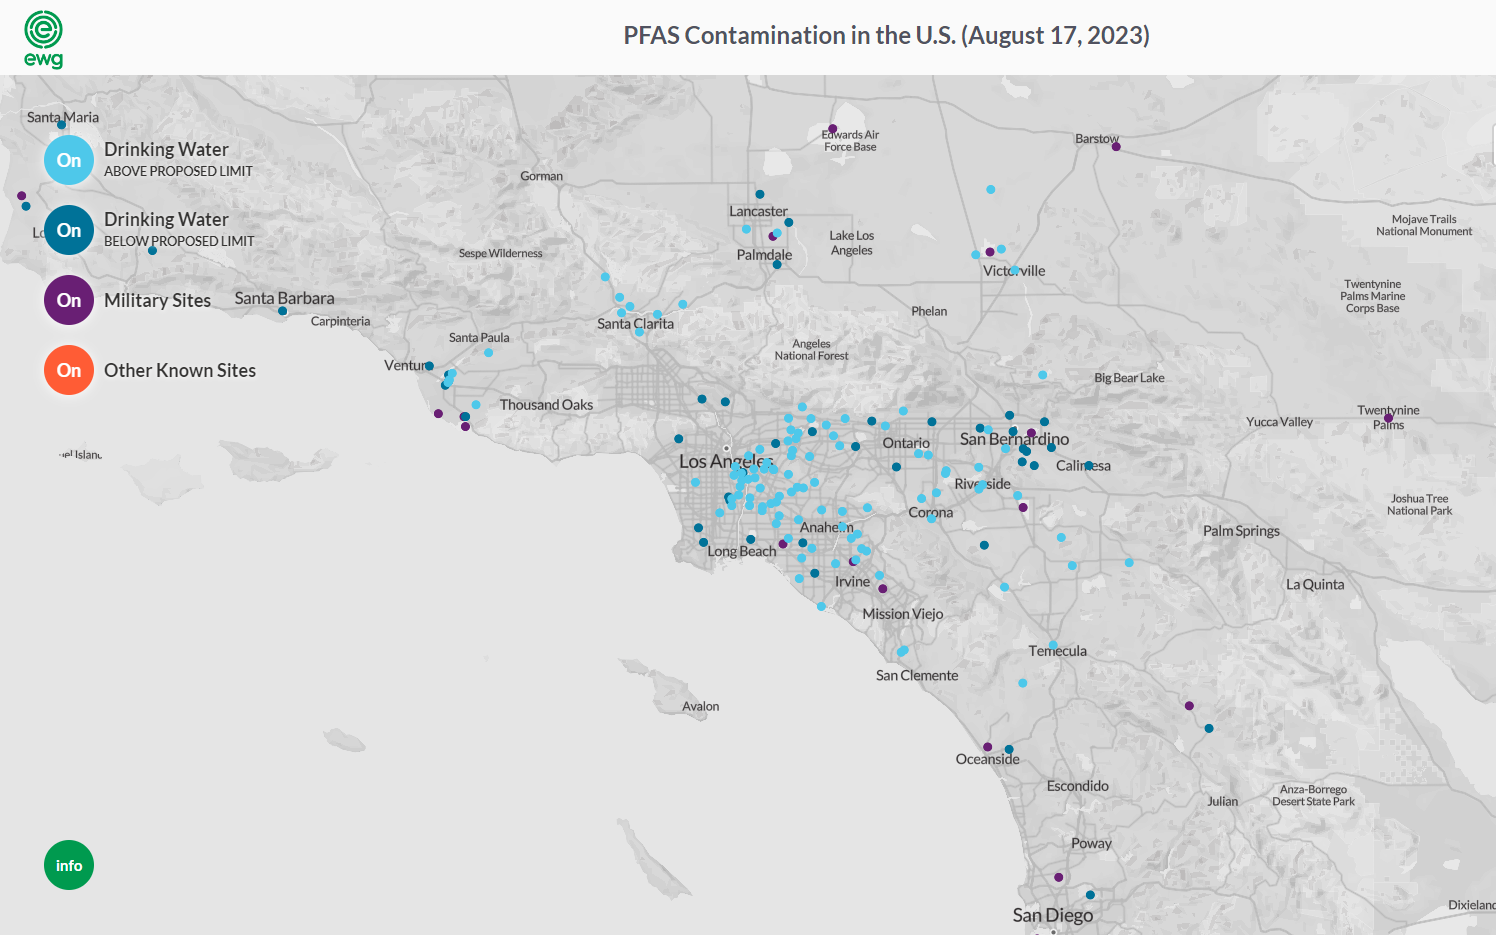 PFAS Forever Chemical Contamination Map of Southern California